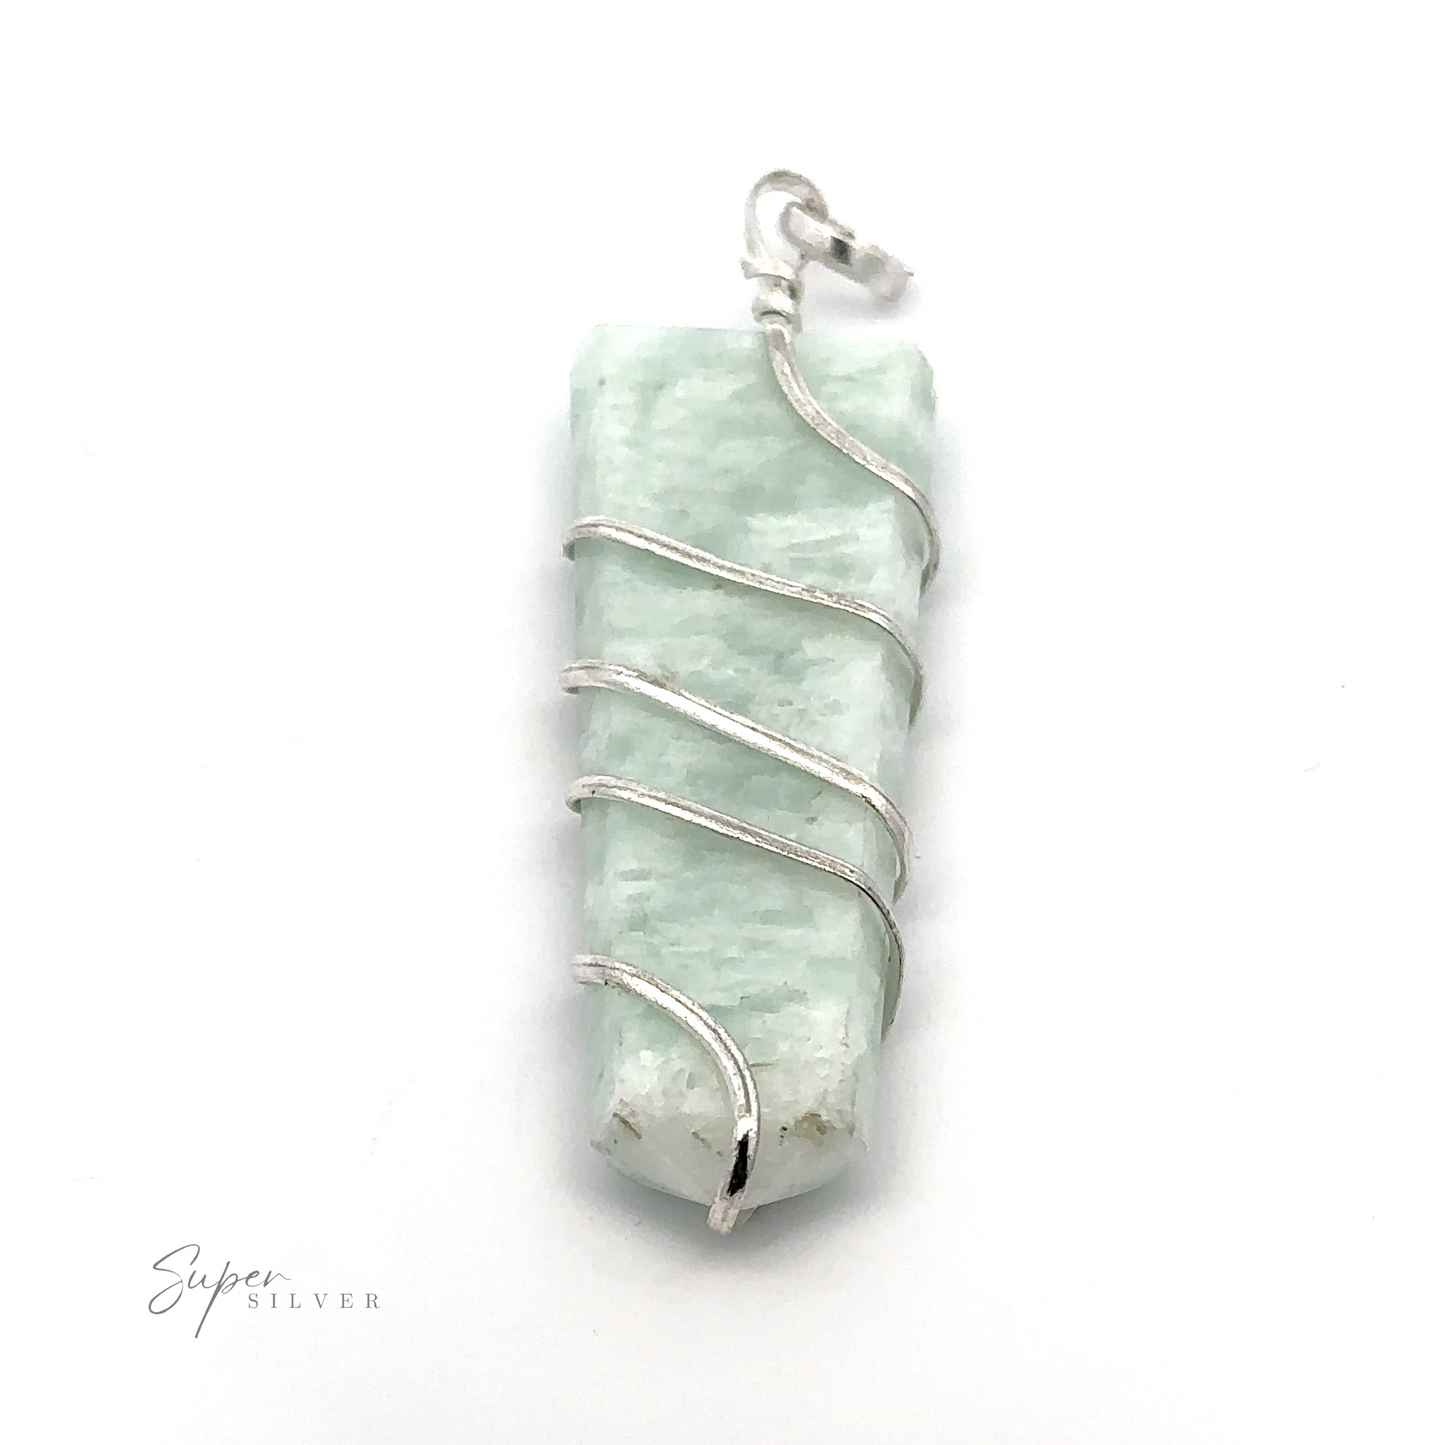 
                  
                    A light green rectangular Wire Wrapped Slab Pendant displayed against a white background. The image includes the text "Super Silver" in the bottom left corner.
                  
                